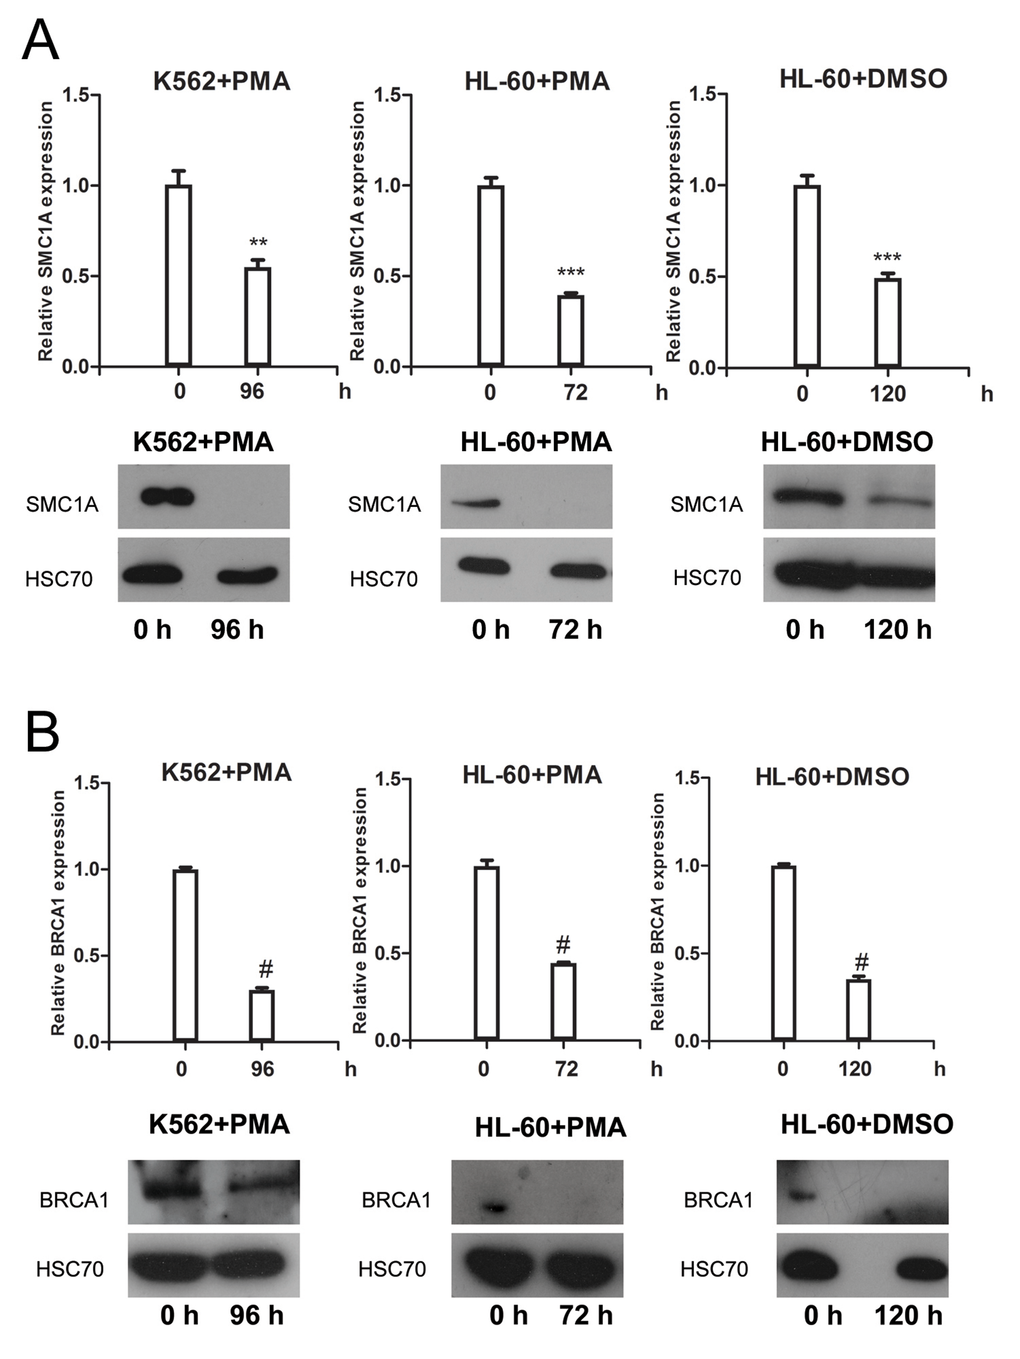 SMC1A and BRC1A expression levels are down-regulated in terminally differentiat-ed cells